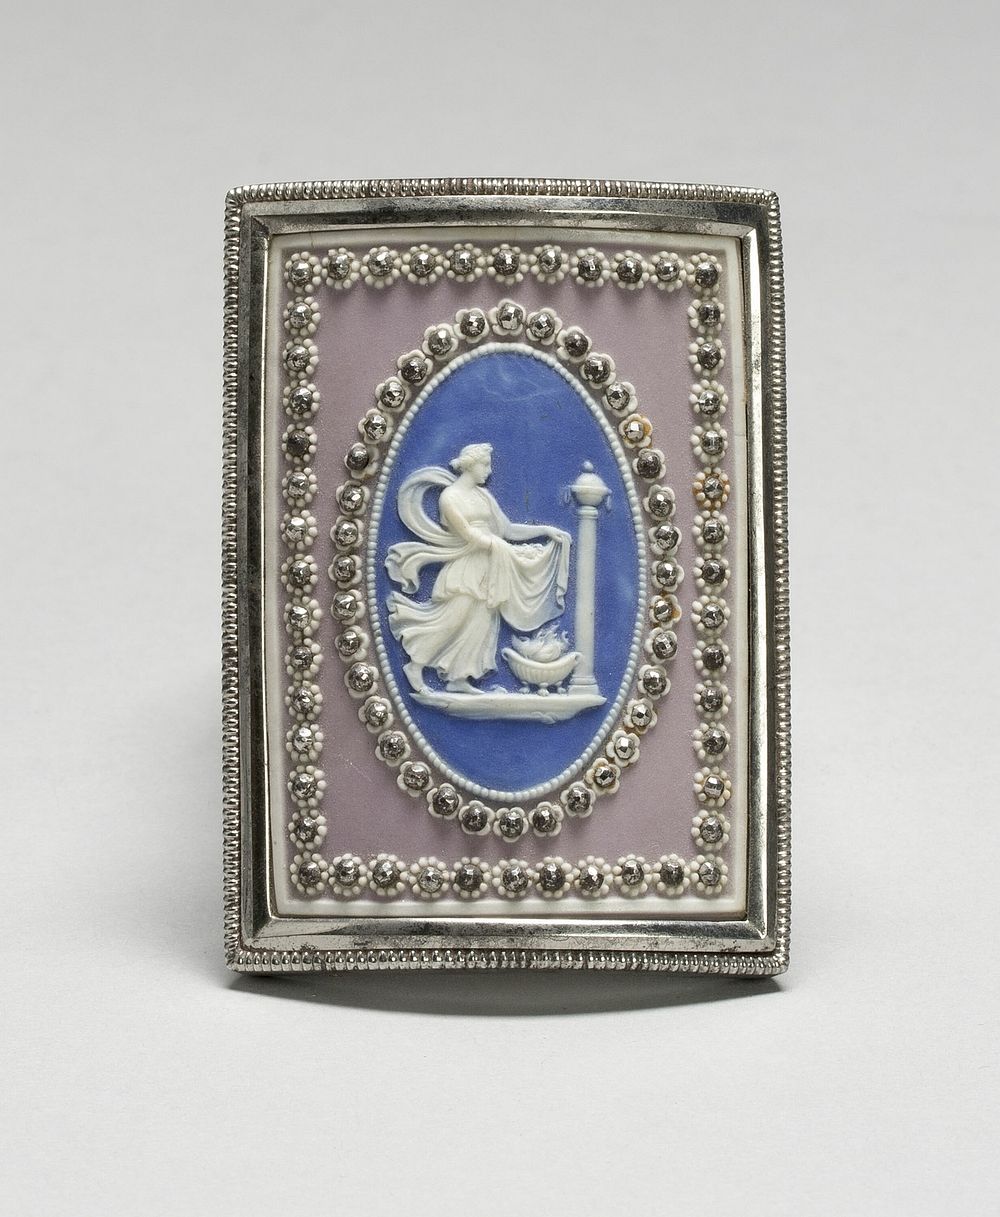 Buckle by Wedgwood Manufactory (Manufacturer)